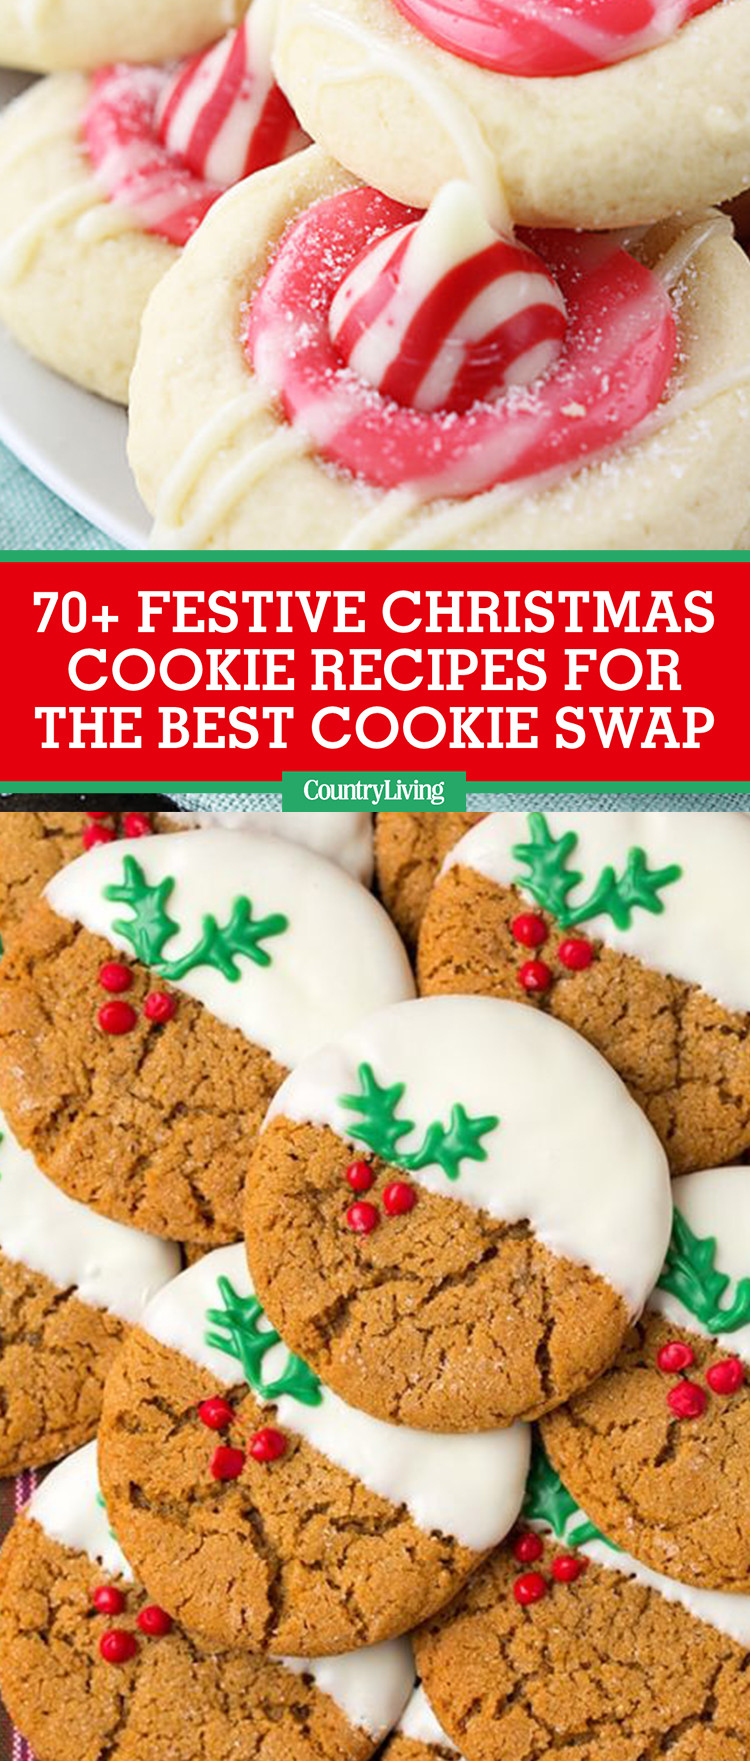 The Best Christmas Cookies Recipes With Pictures
 70 Best Christmas Cookie Recipes 2017 Easy Ideas for